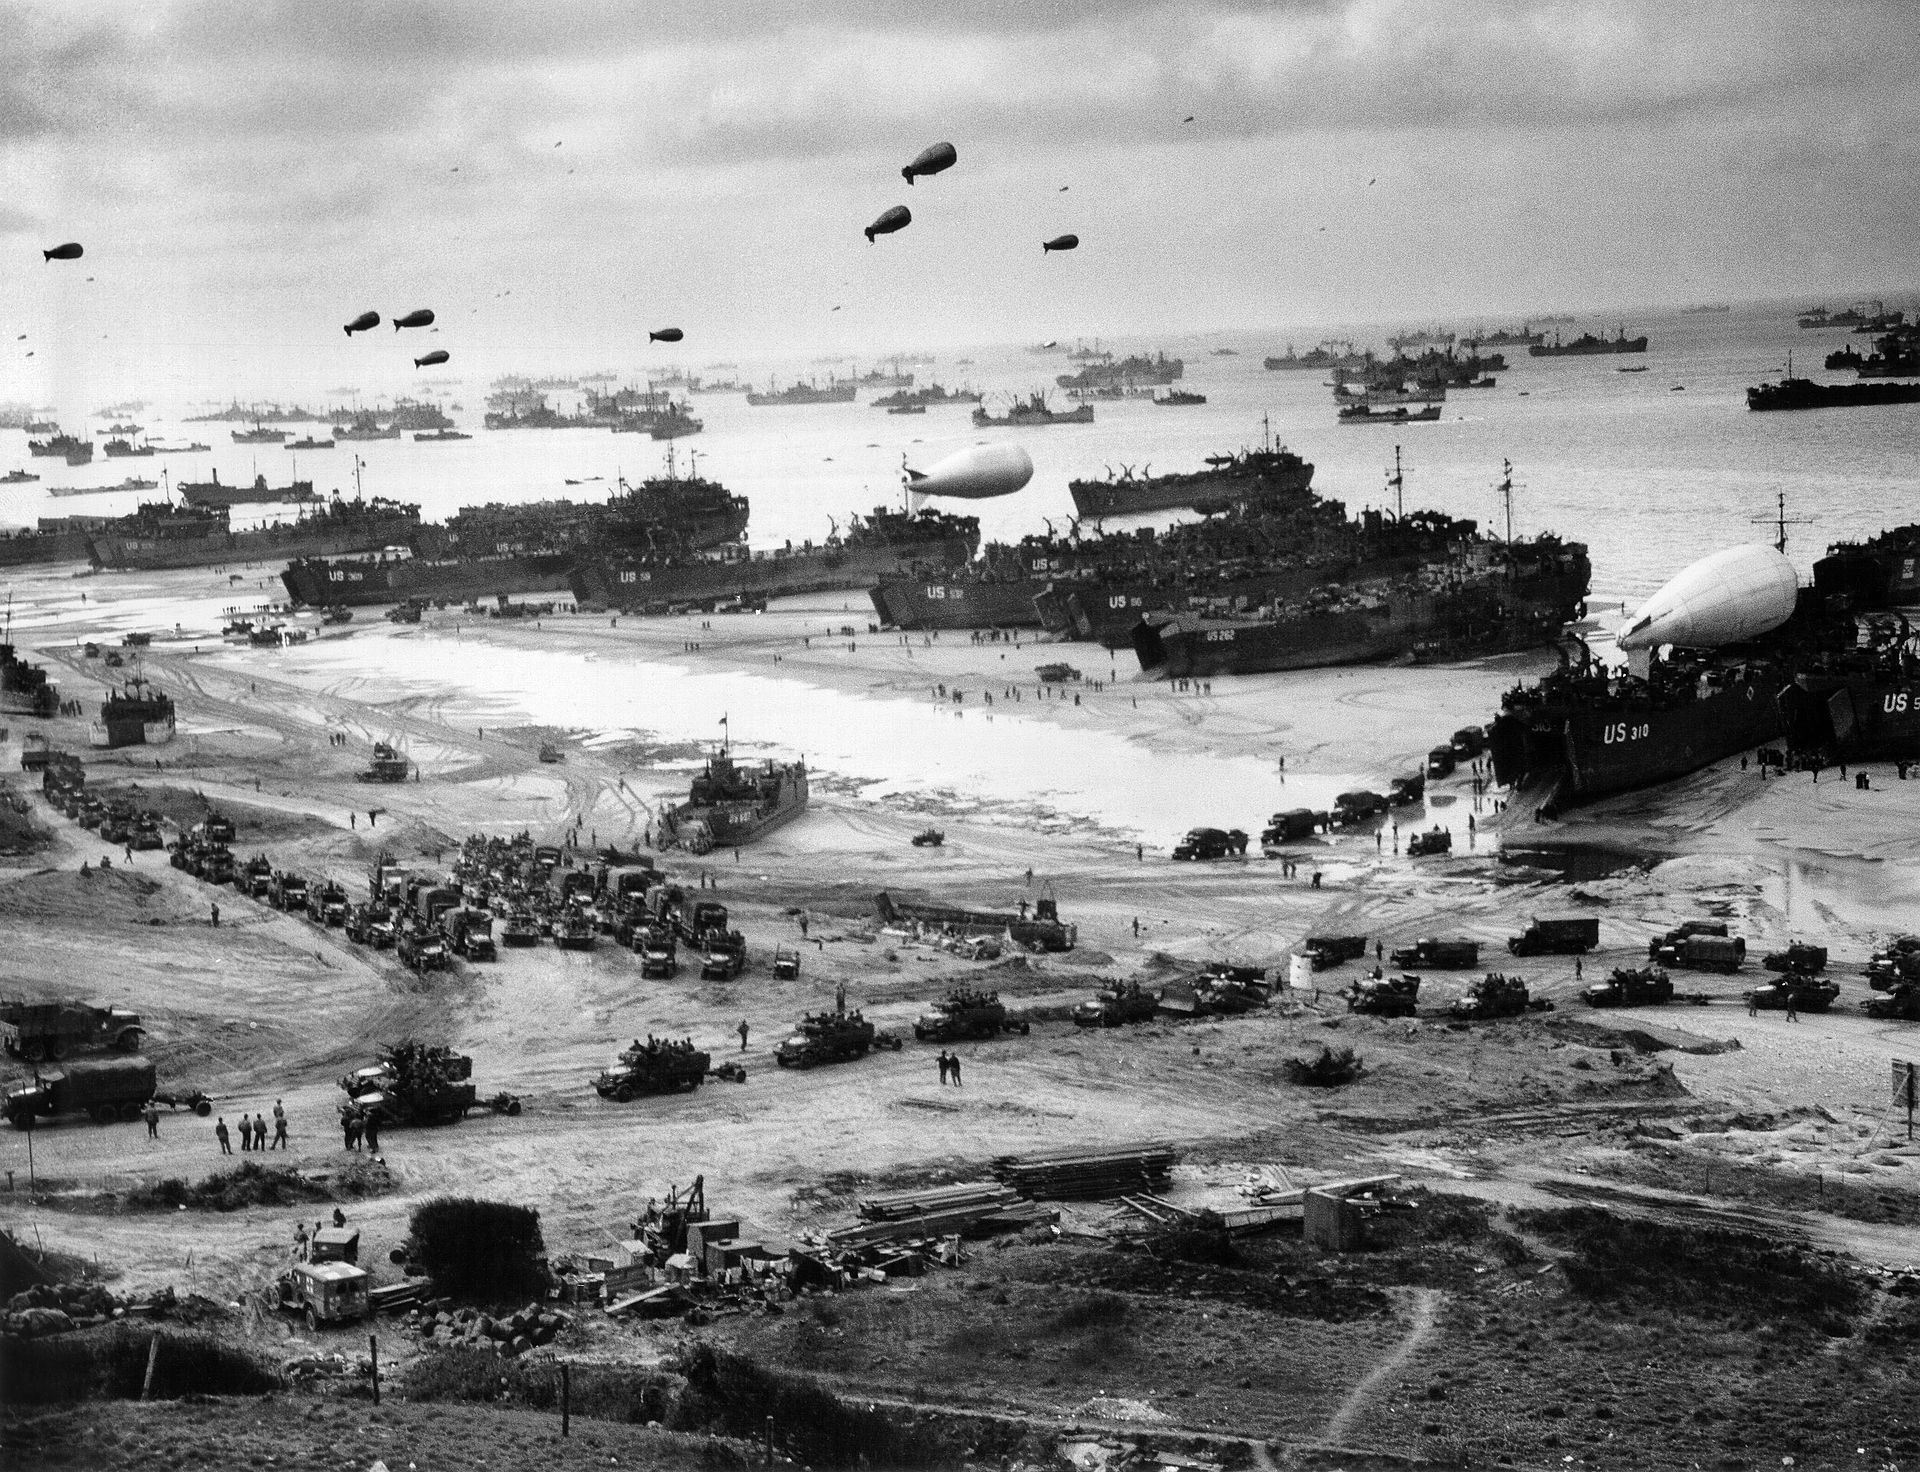 Normandy on D-Day